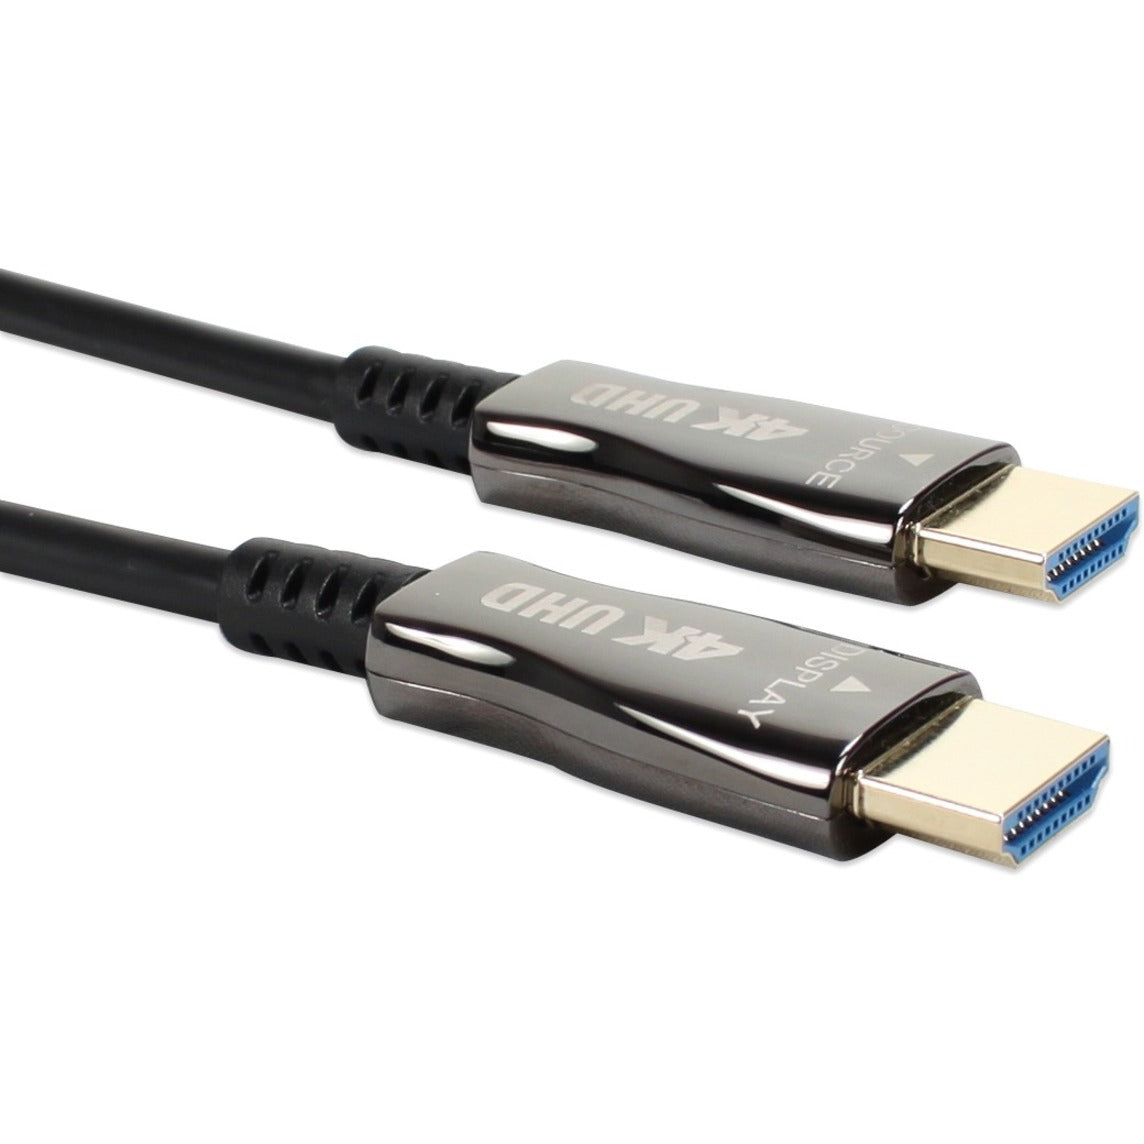 QVS HF-15M HDMI Audio Video Cable, 49.21 ft, 3860 x 2160 Supported Resolution